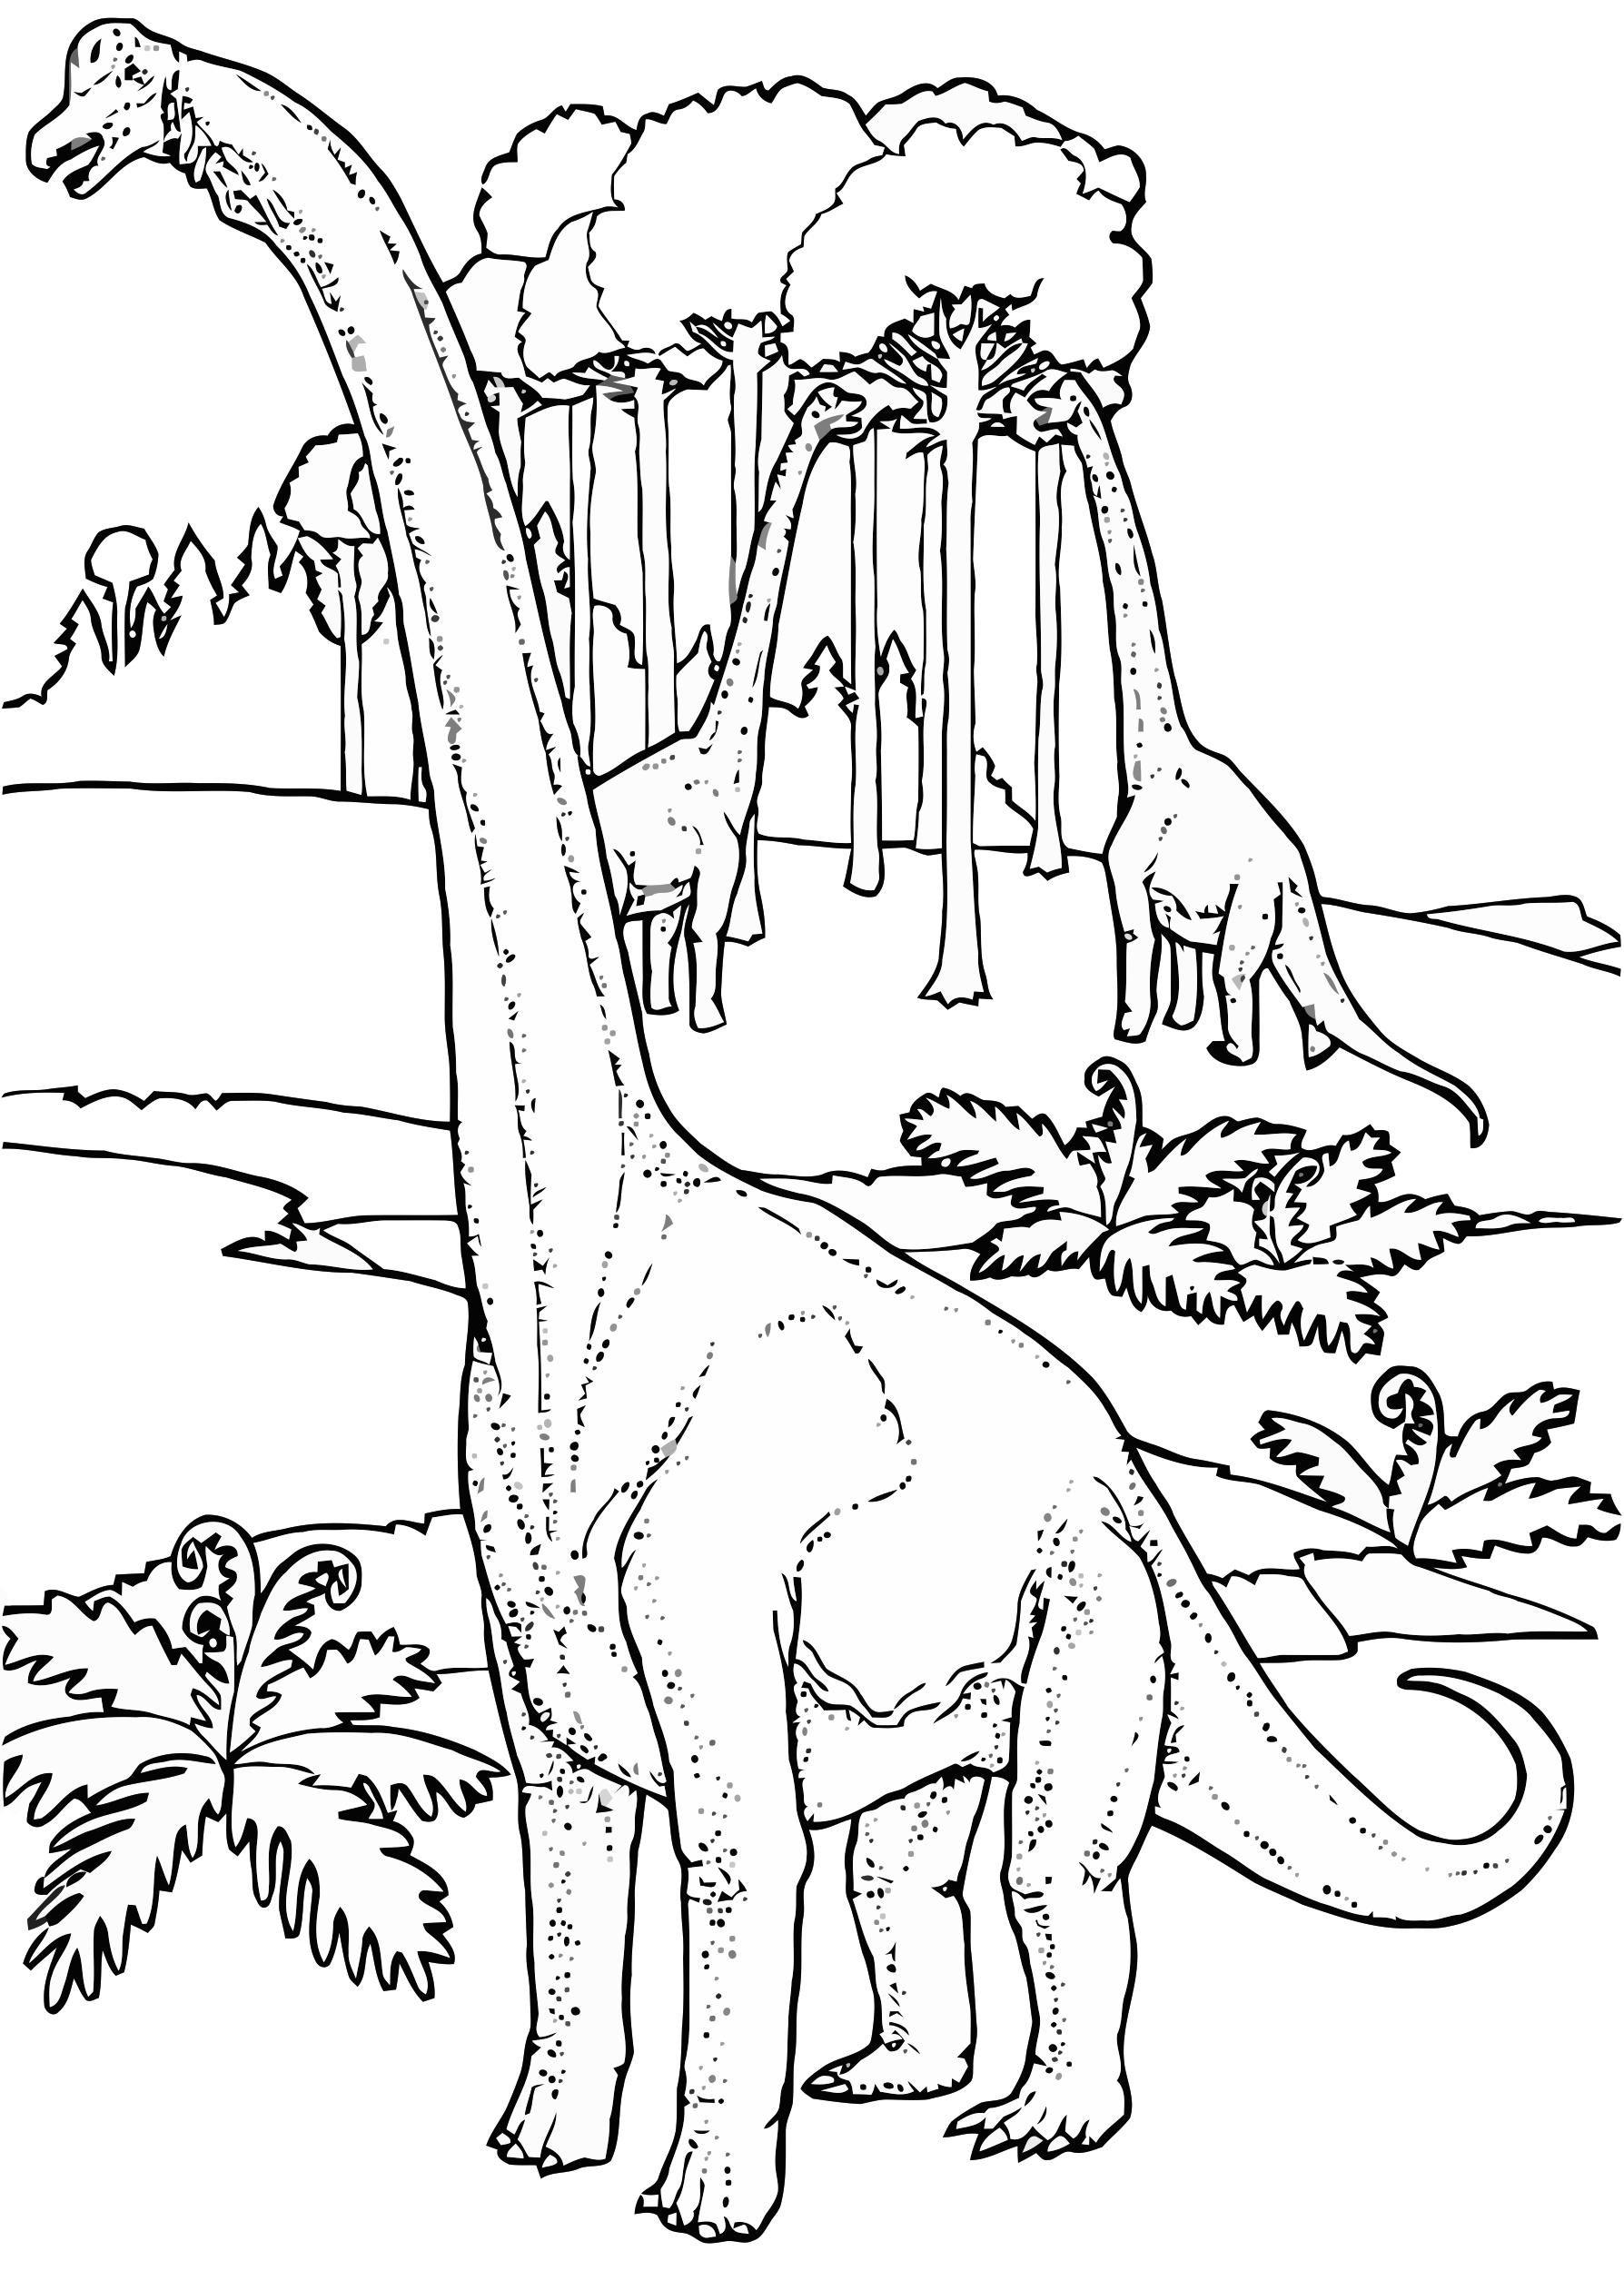 Coloring page brontosaurs